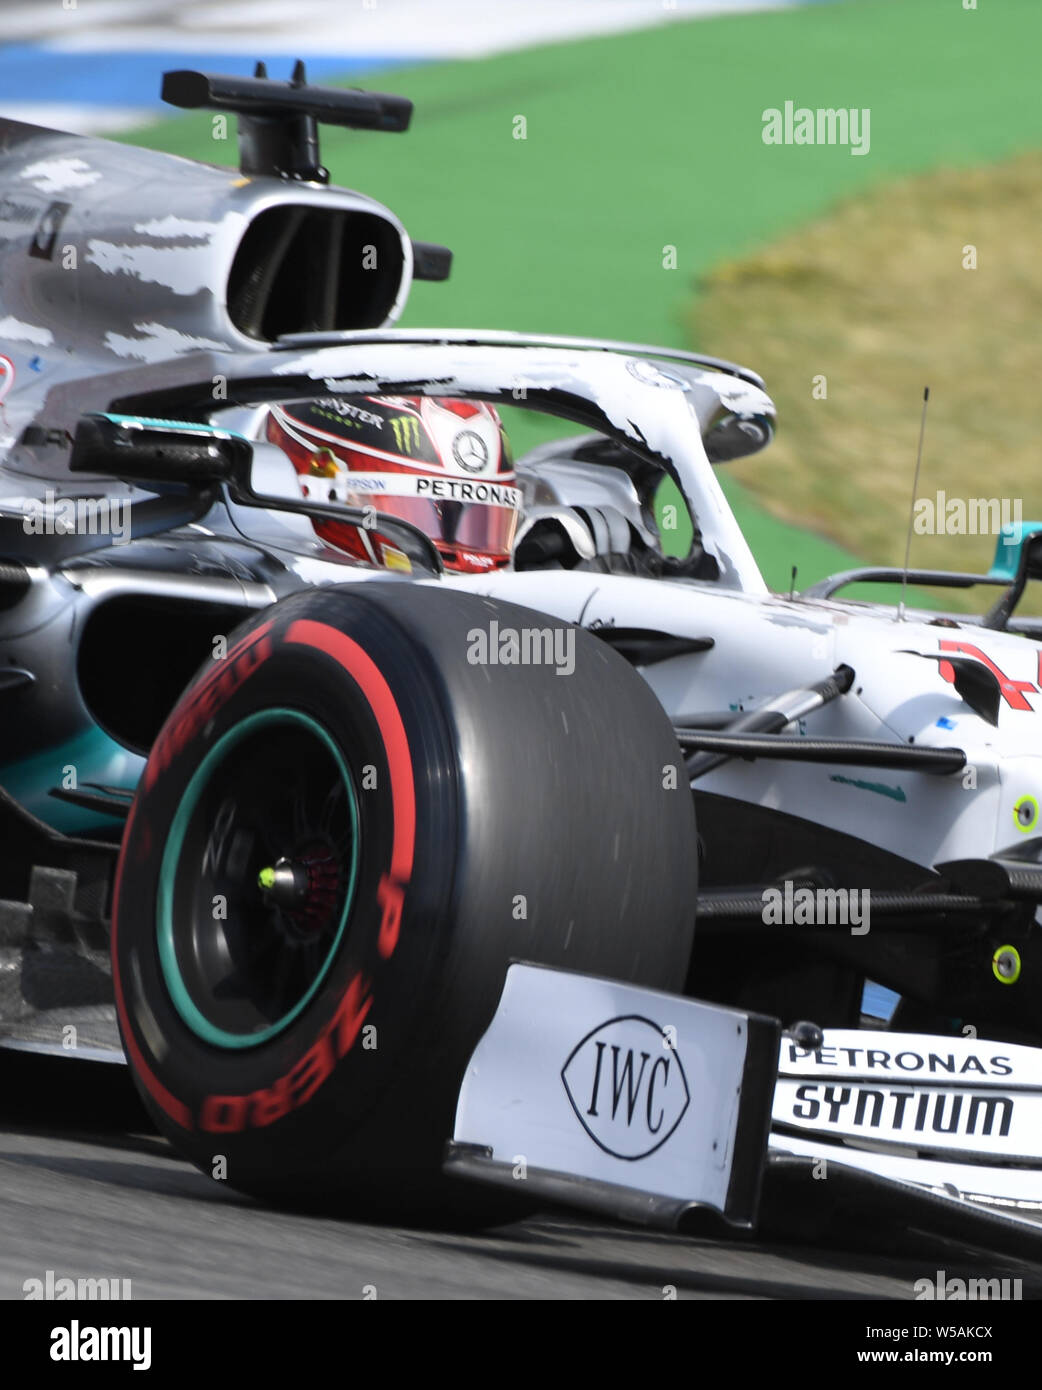 Hockenheim, Germany. 27th July, 2019. Motorsport: Formula 1 World Championship, Grand Prix of Germany. Lewis Hamilton from Great Britain of the Mercedes-AMG Petronas team drives across the track in qualifying. Credit: Uli Deck/dpa/Alamy Live News Stock Photo